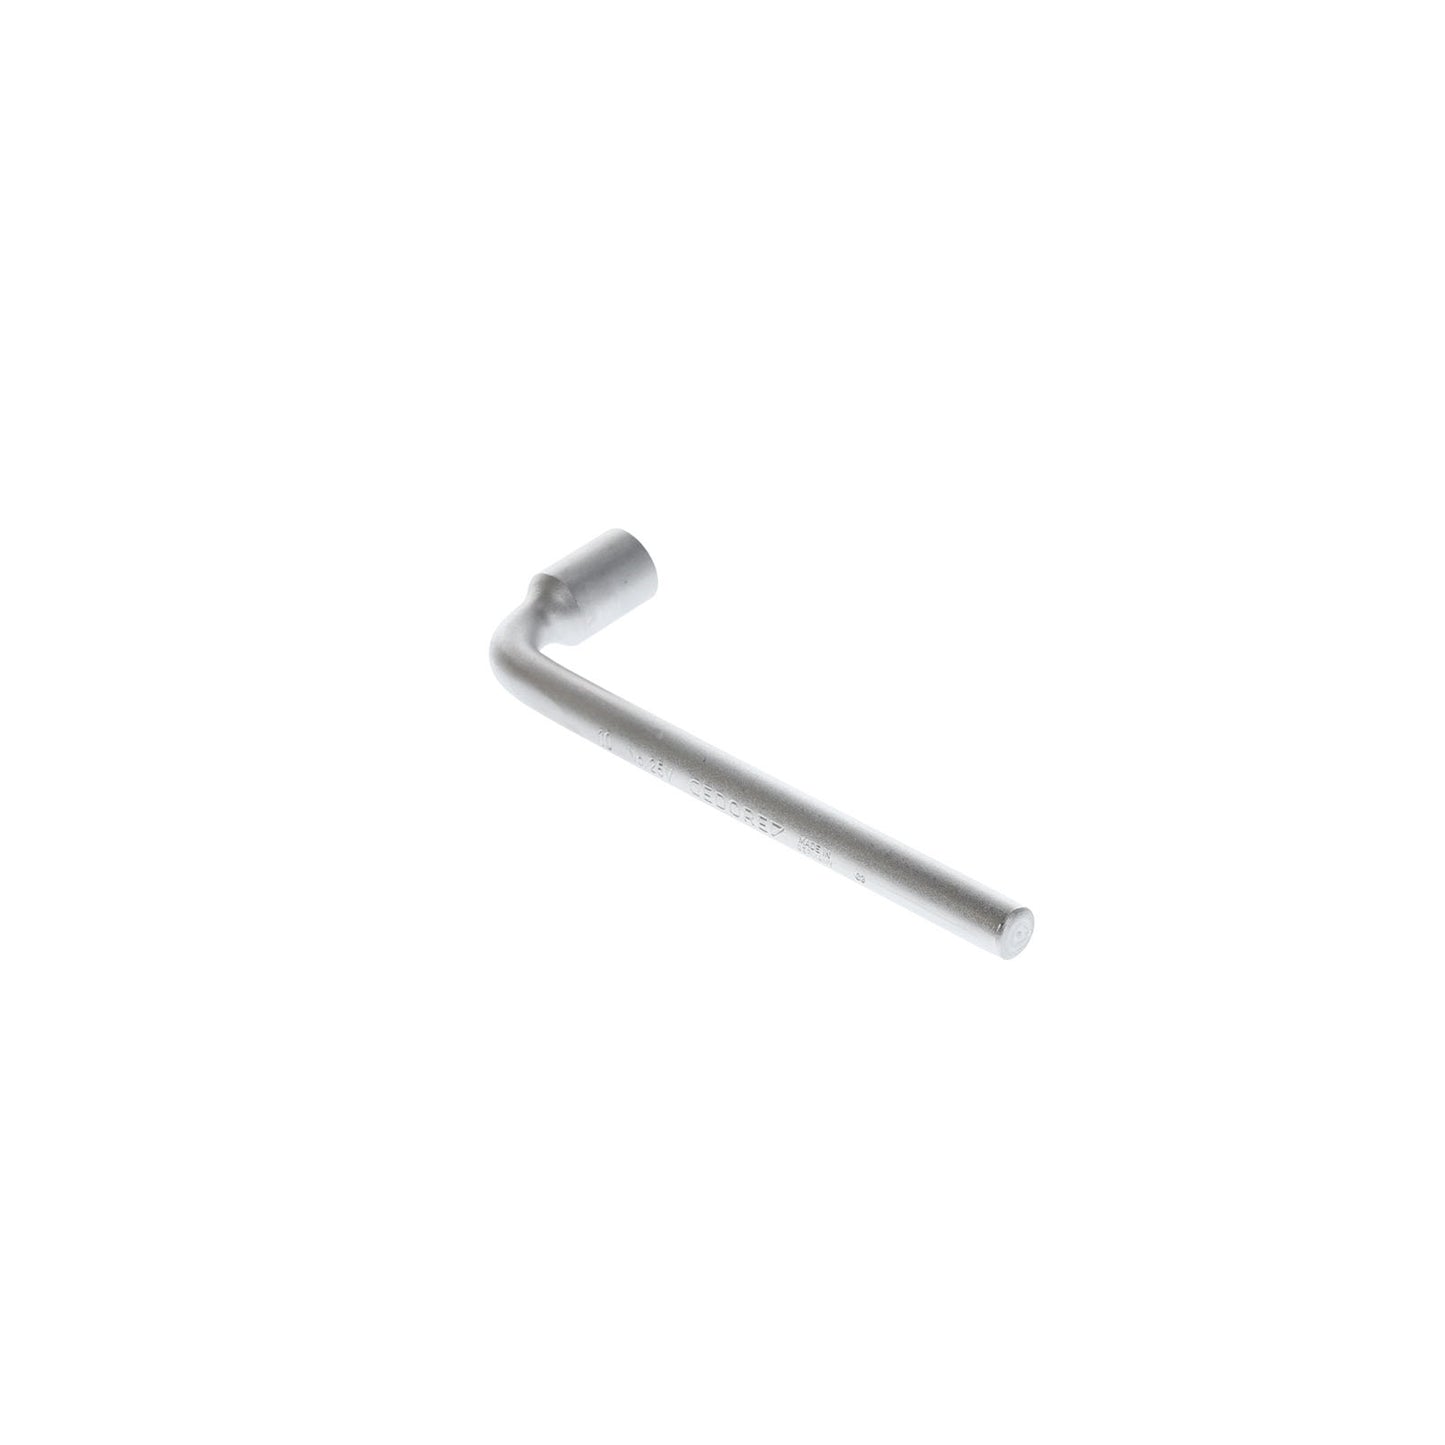 GEDORE 25 V 10 - Square Profile Wrench, 10mm (6194930)